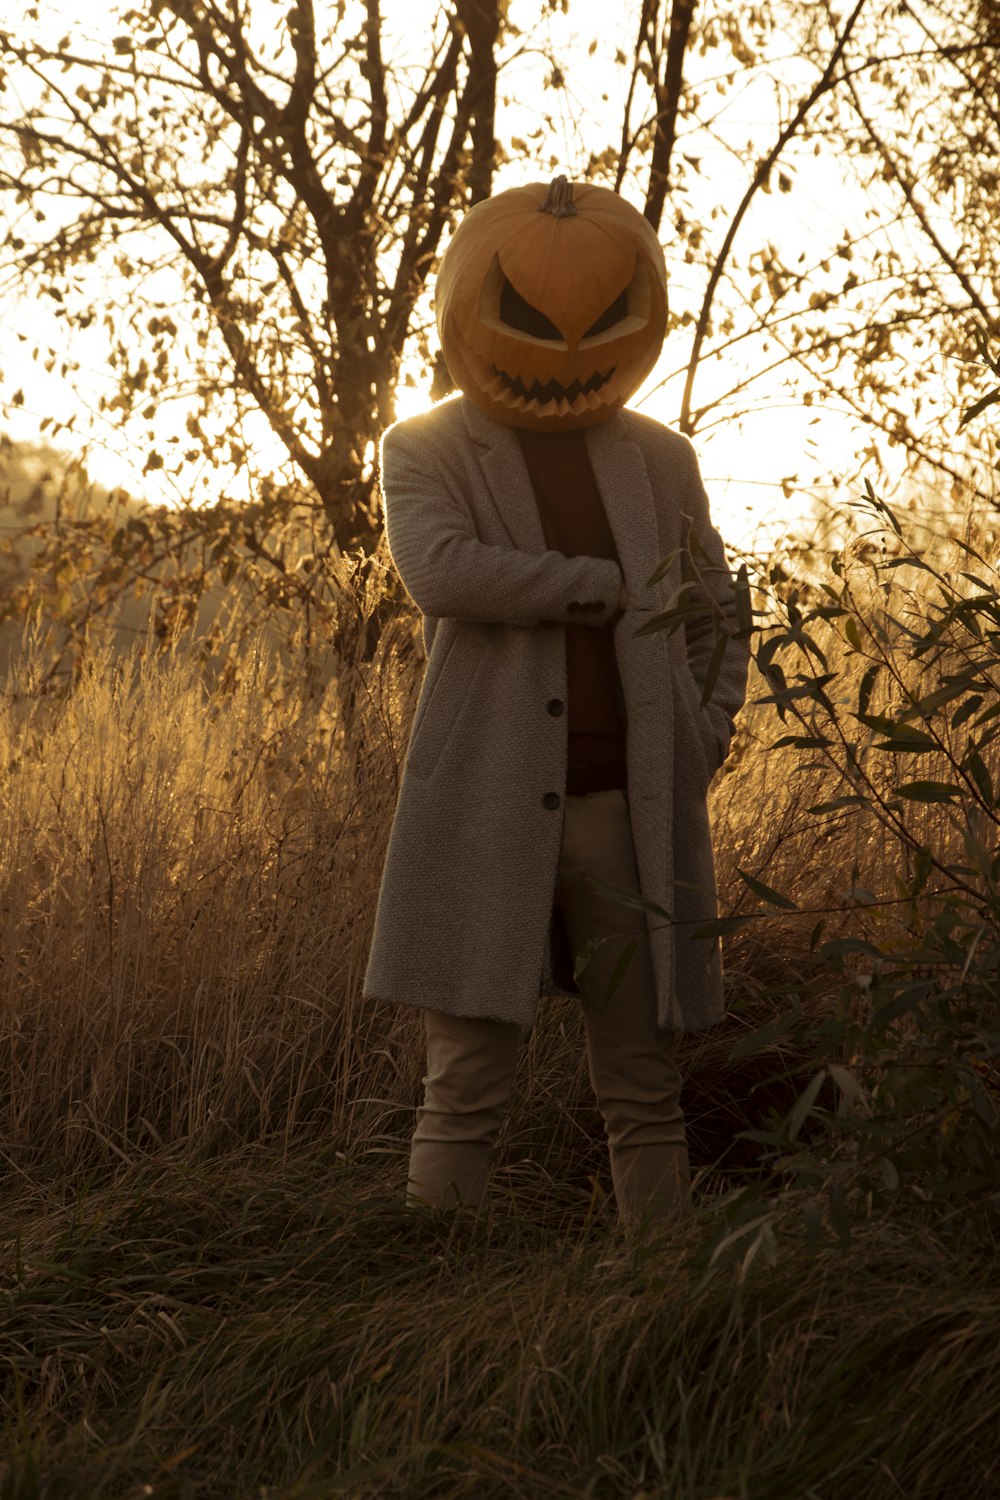 a person standing in a field with a pumpkin on their head